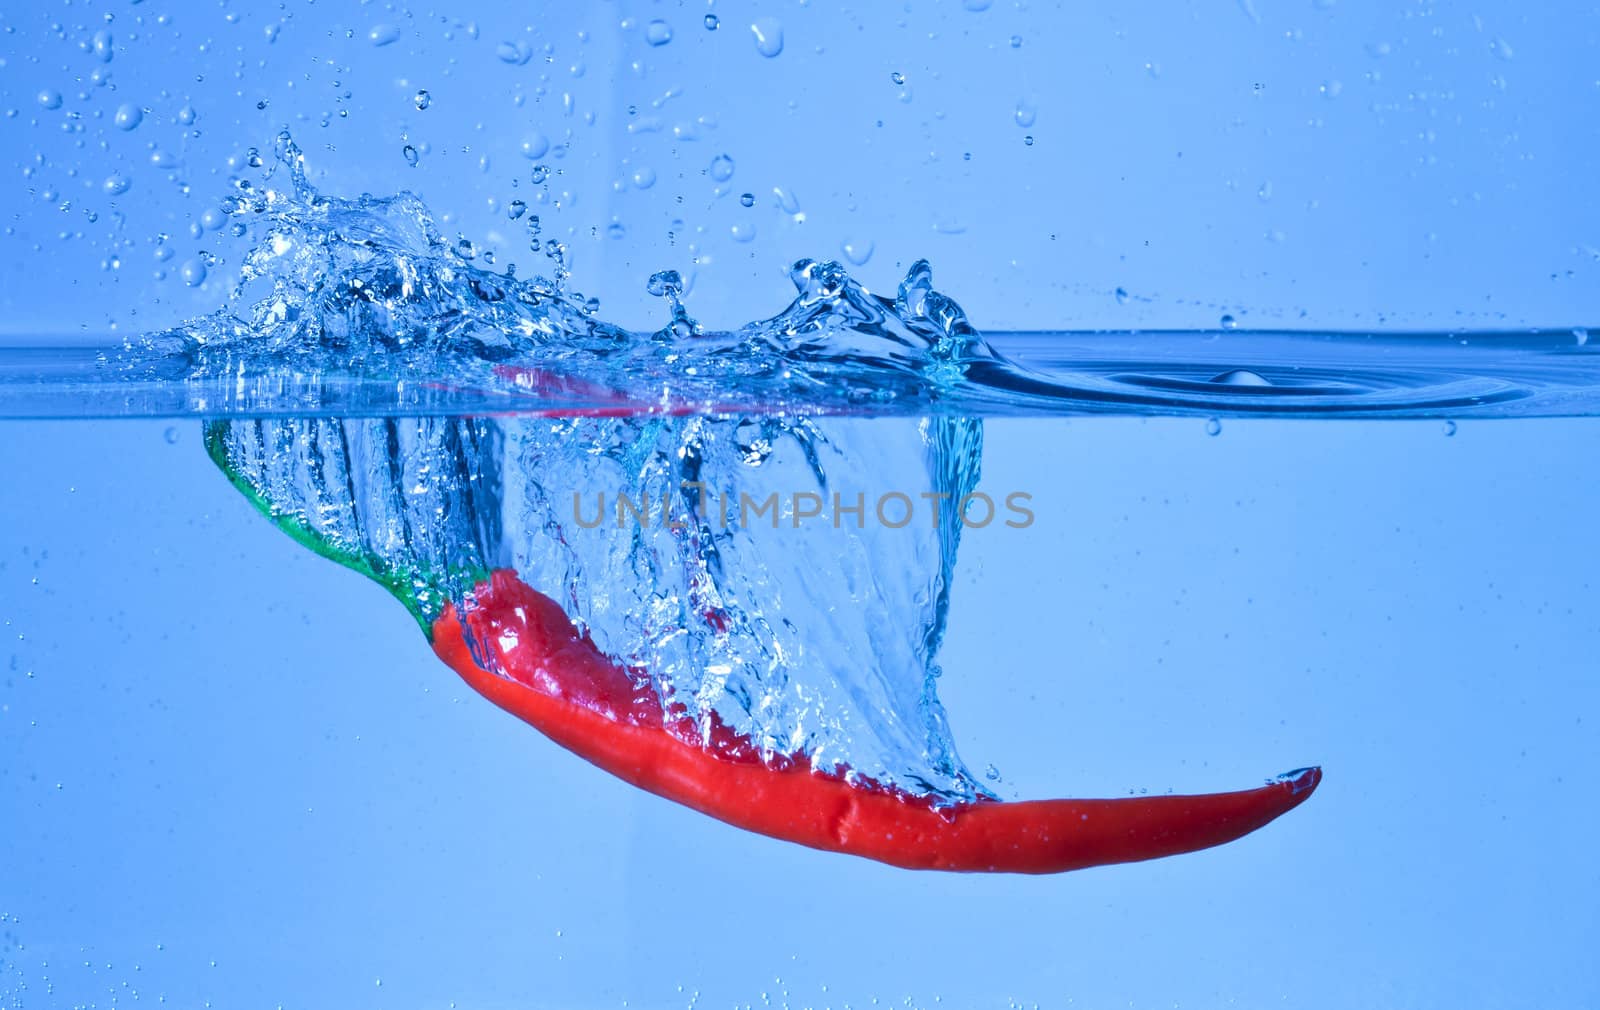 red pepper dropped into water with splash by Discovod